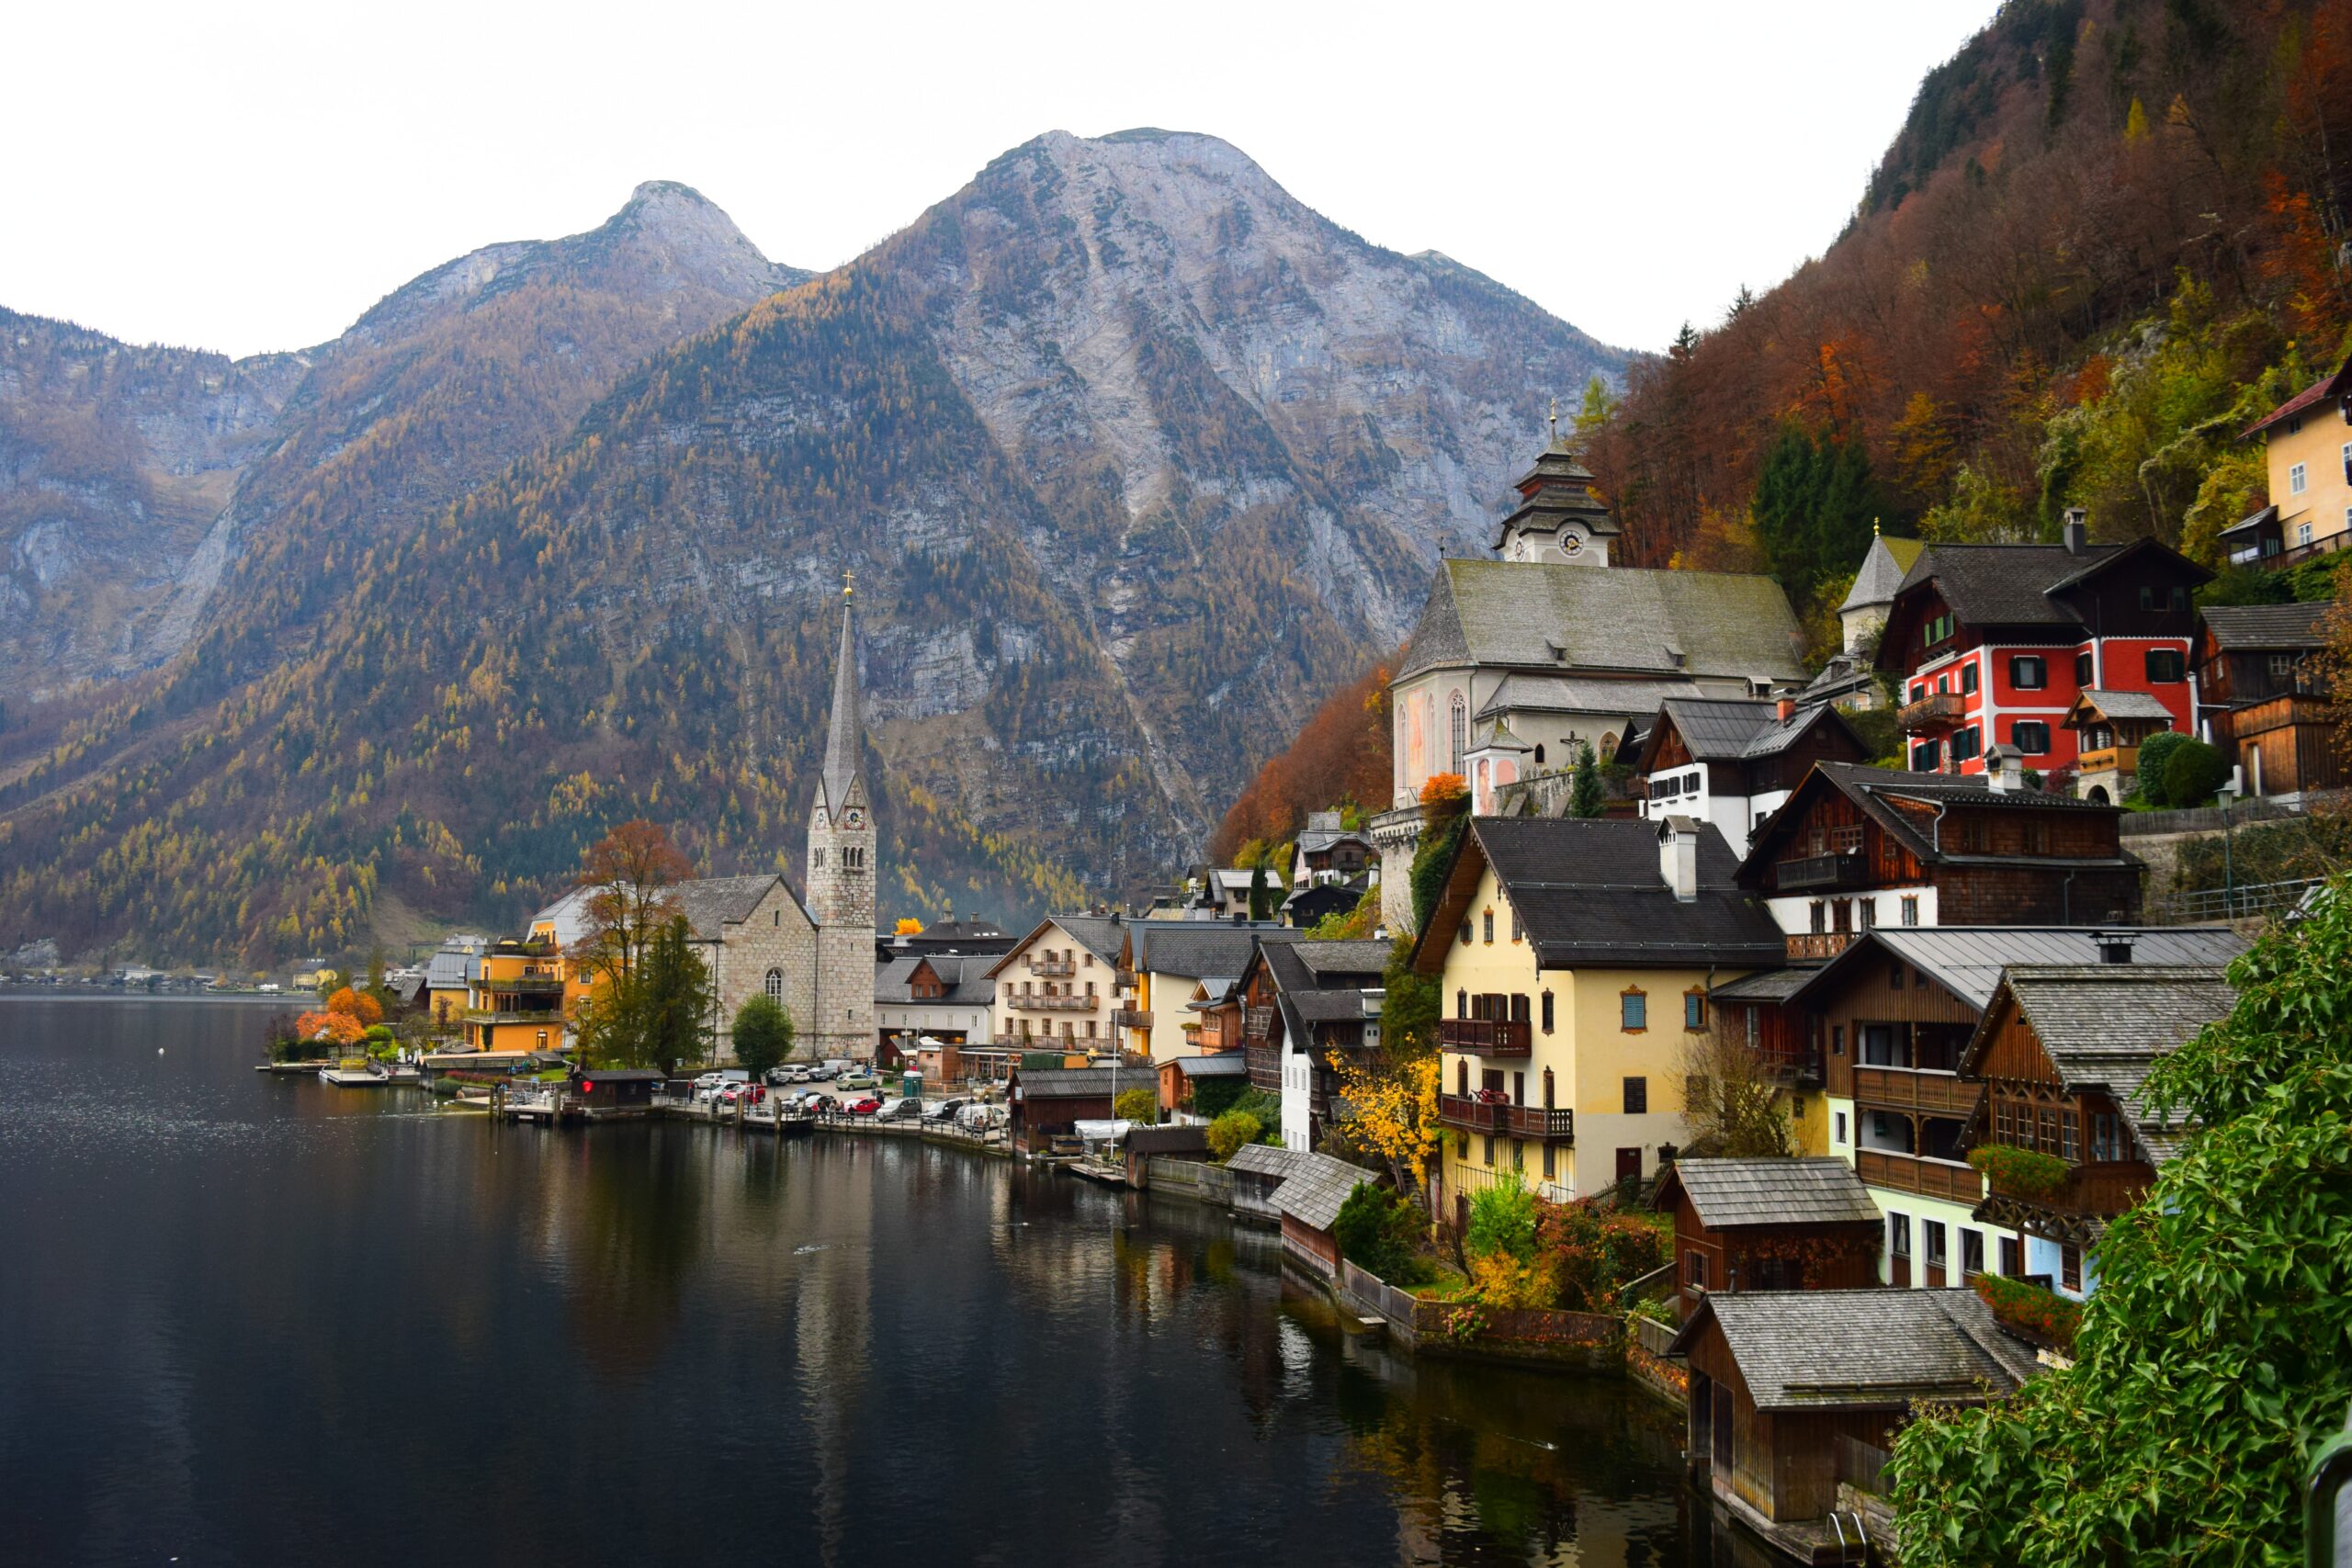 Autumnal view of the town of Hallstatt in Autria, with typical houses overlooking a lake